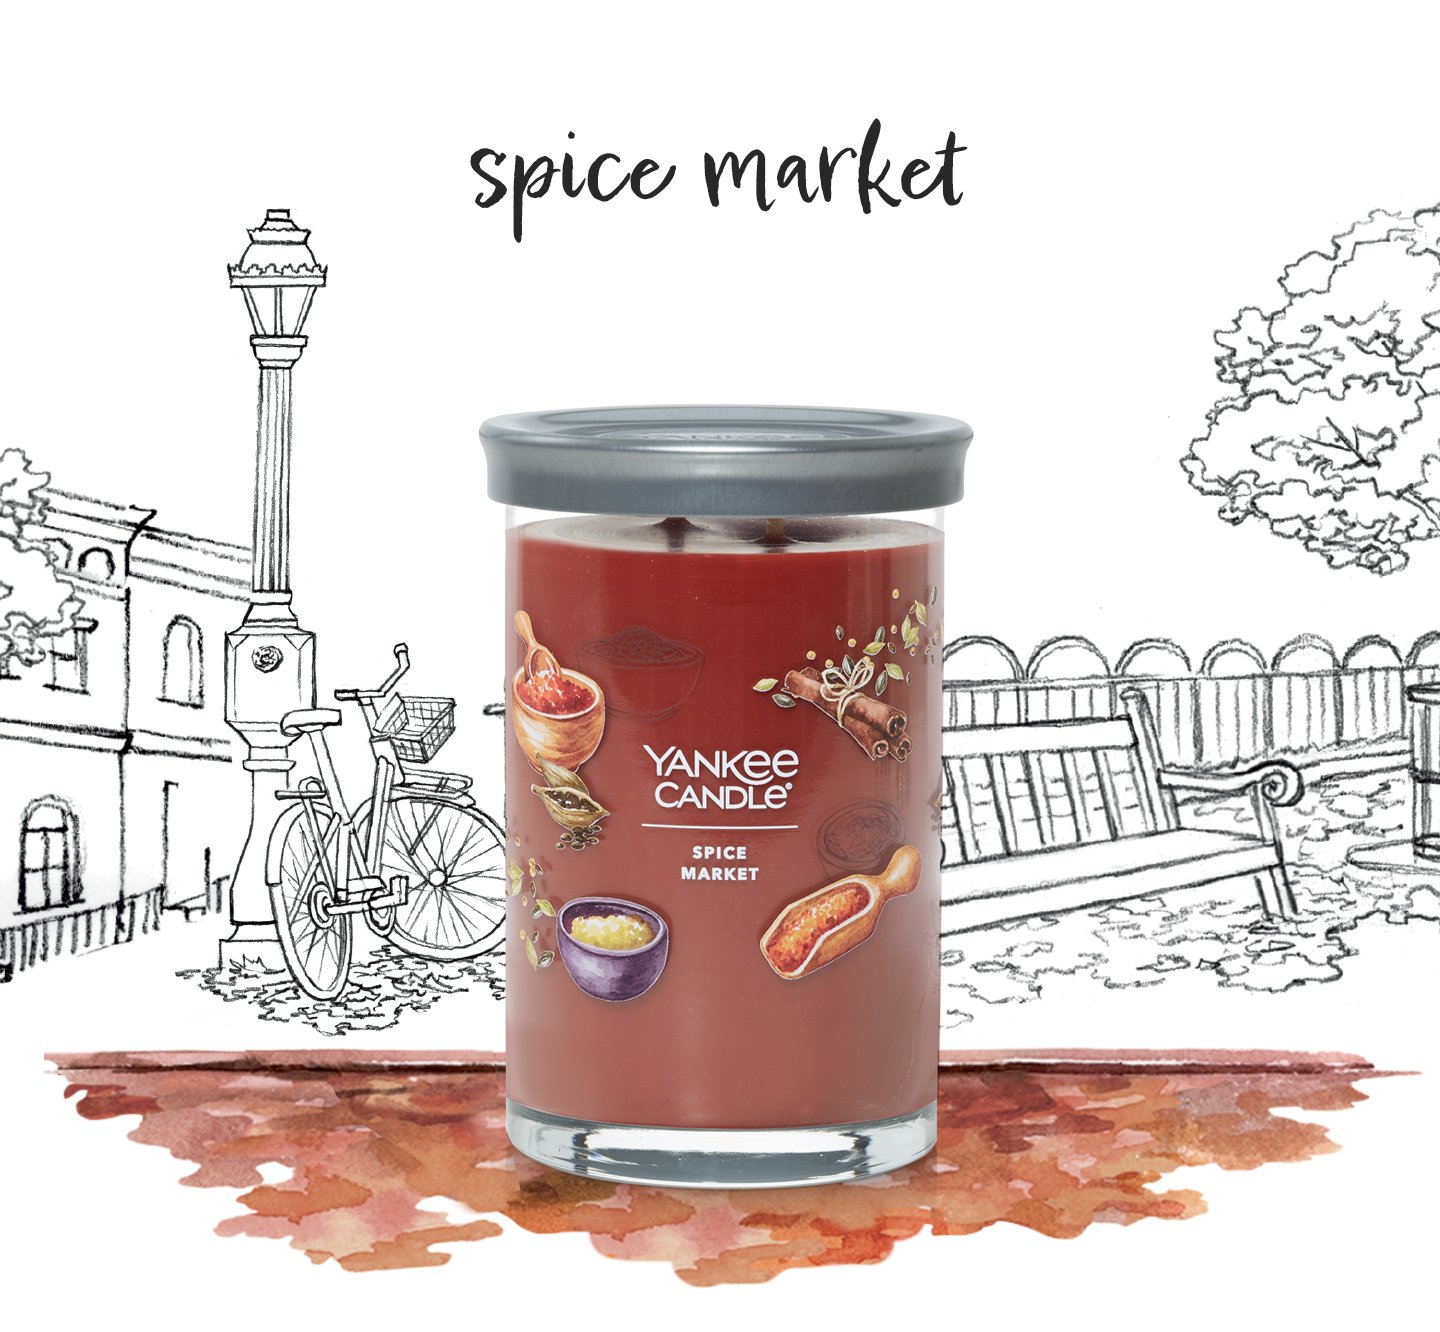 spice market signature large tumbler candle in illustrated city park scene